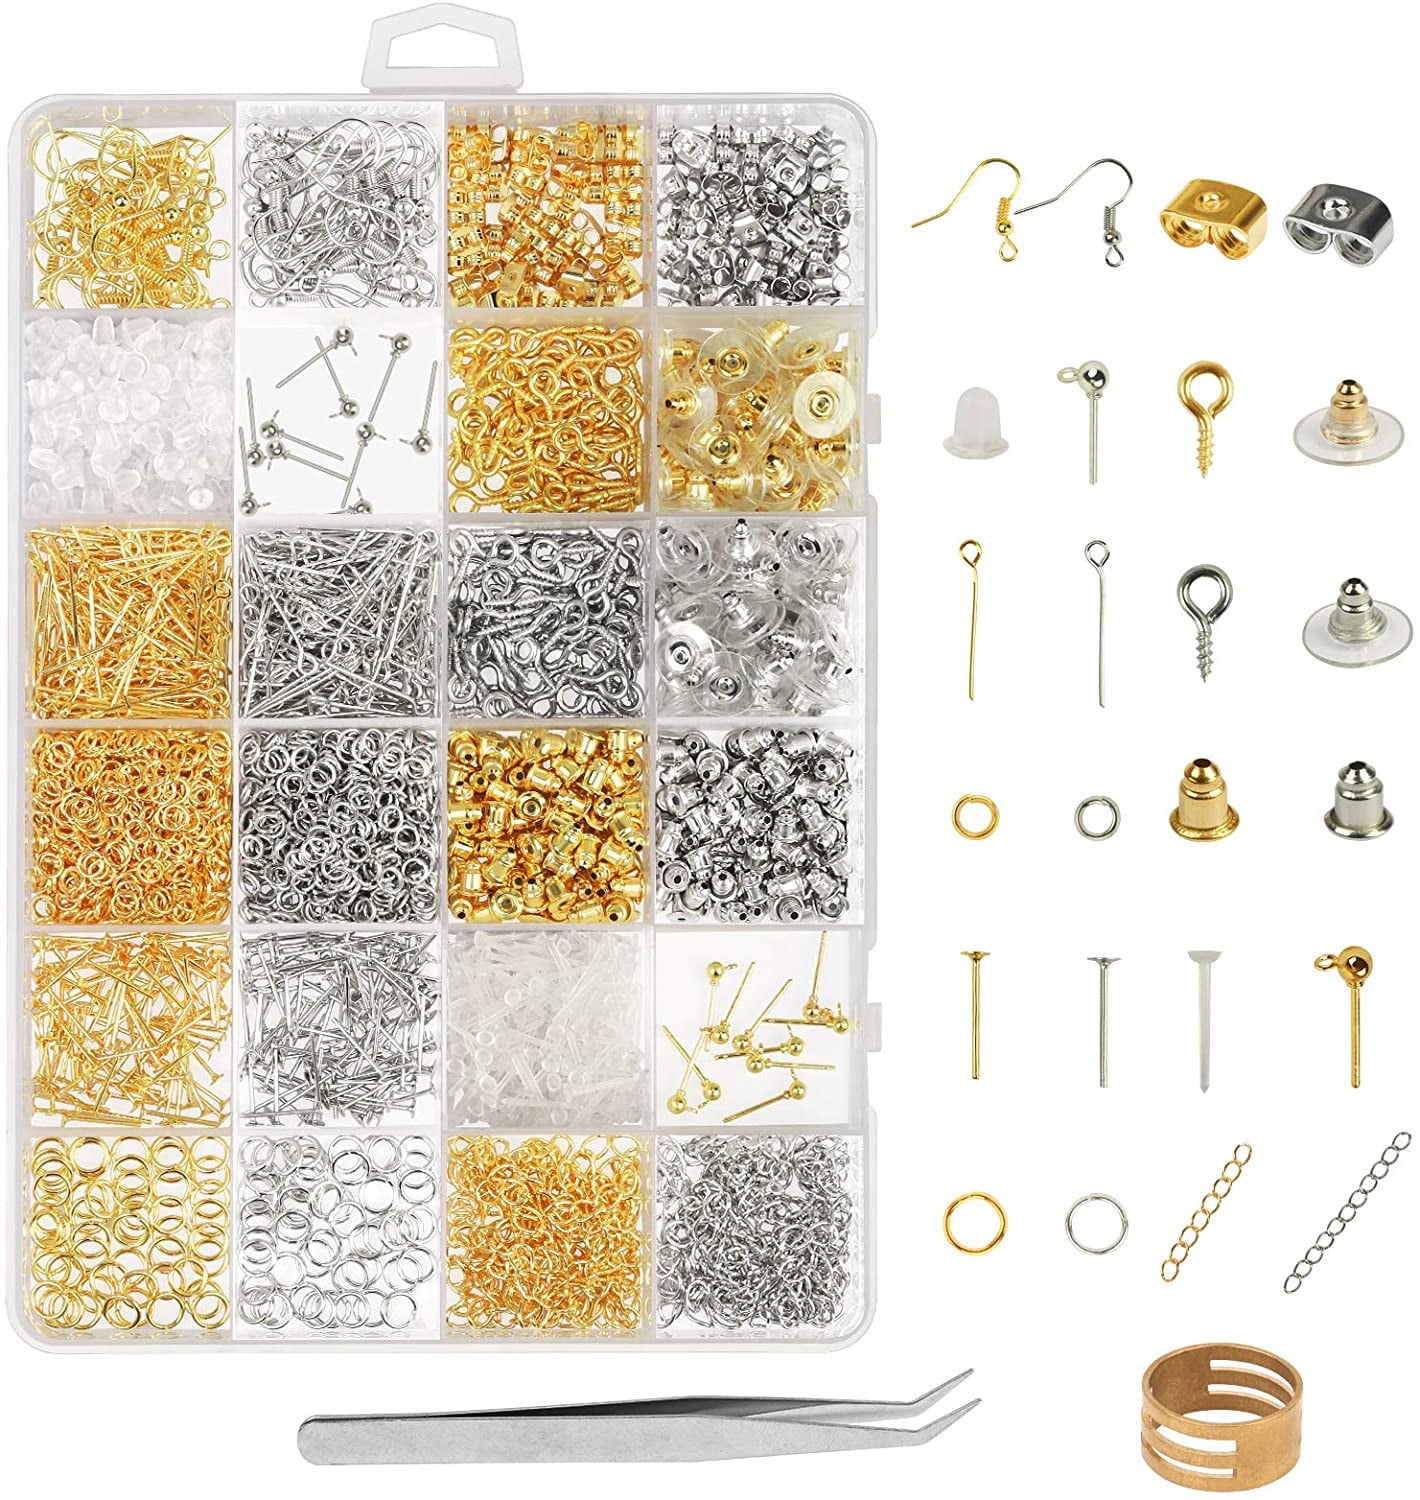 jewelry repair kit products for sale